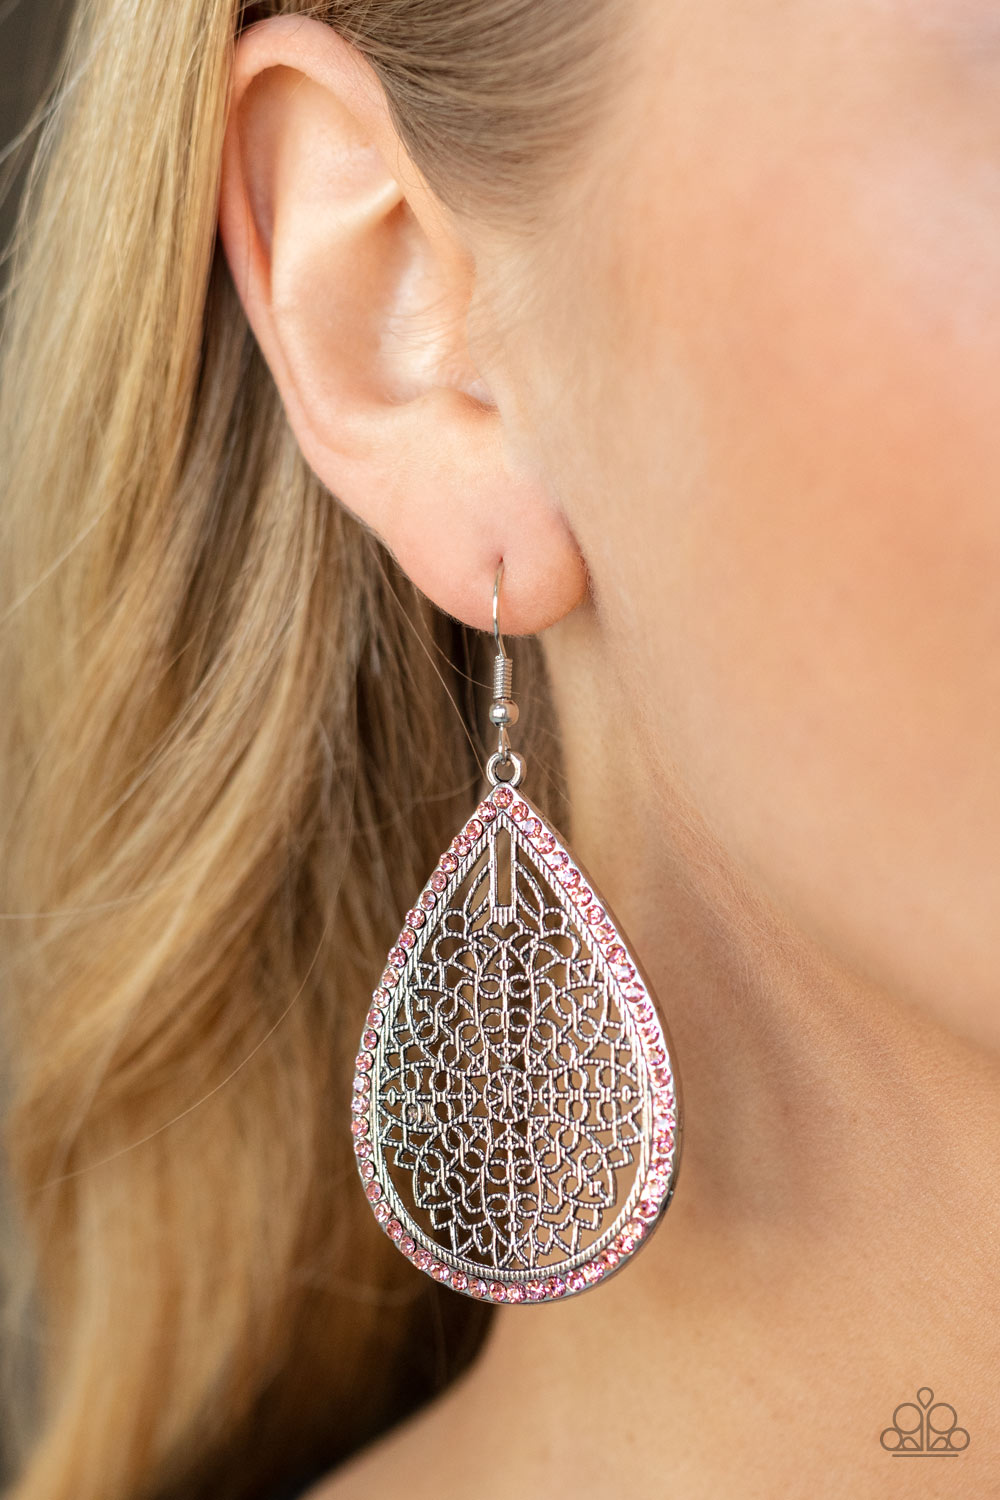 Fleur de Fantasy Pink Earring - Paparazzi Accessories  Bordered in dainty pink rhinestones, the center of an oversized silver teardrop is filled with an airy floral pattern for a seasonal flair. Earring attaches to a standard fishhook fitting.  All Paparazzi Accessories are lead free and nickel free!  Sold as one pair of earrings.